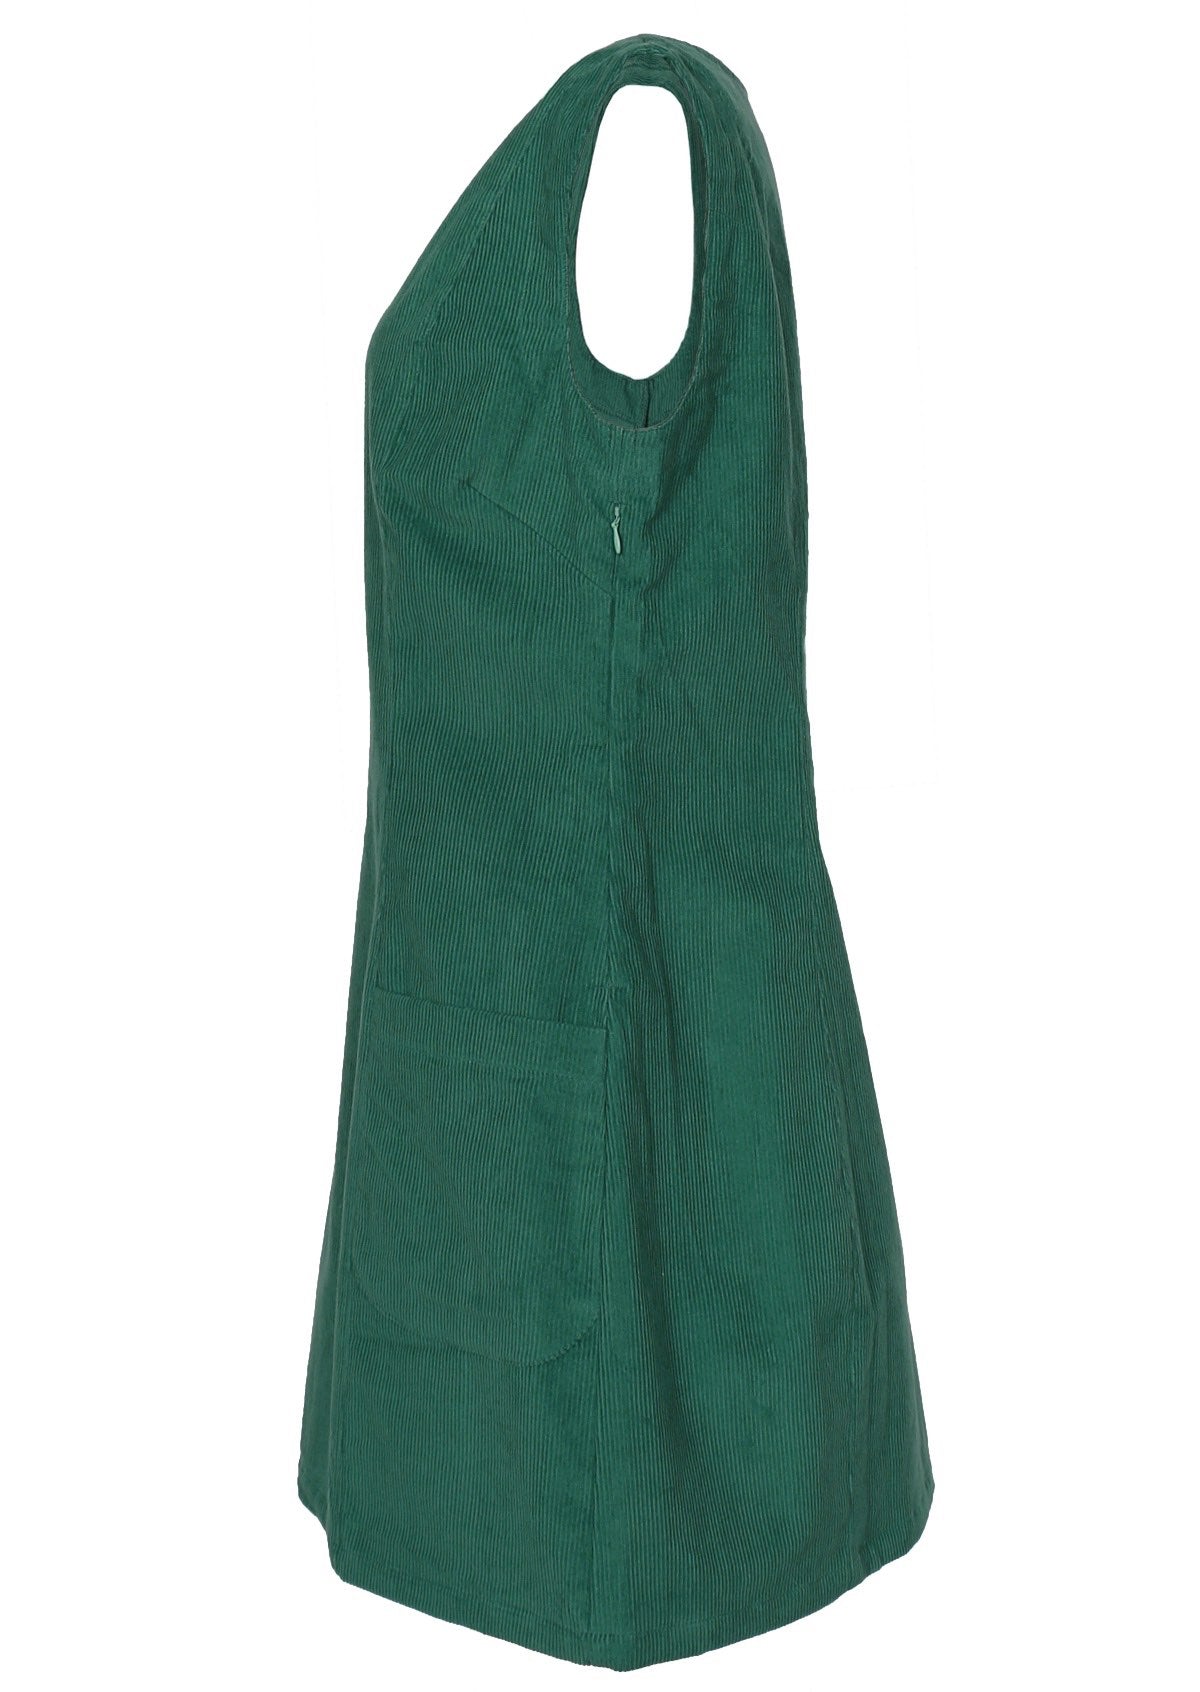 Cotton tunic with pockets and a side zip. 